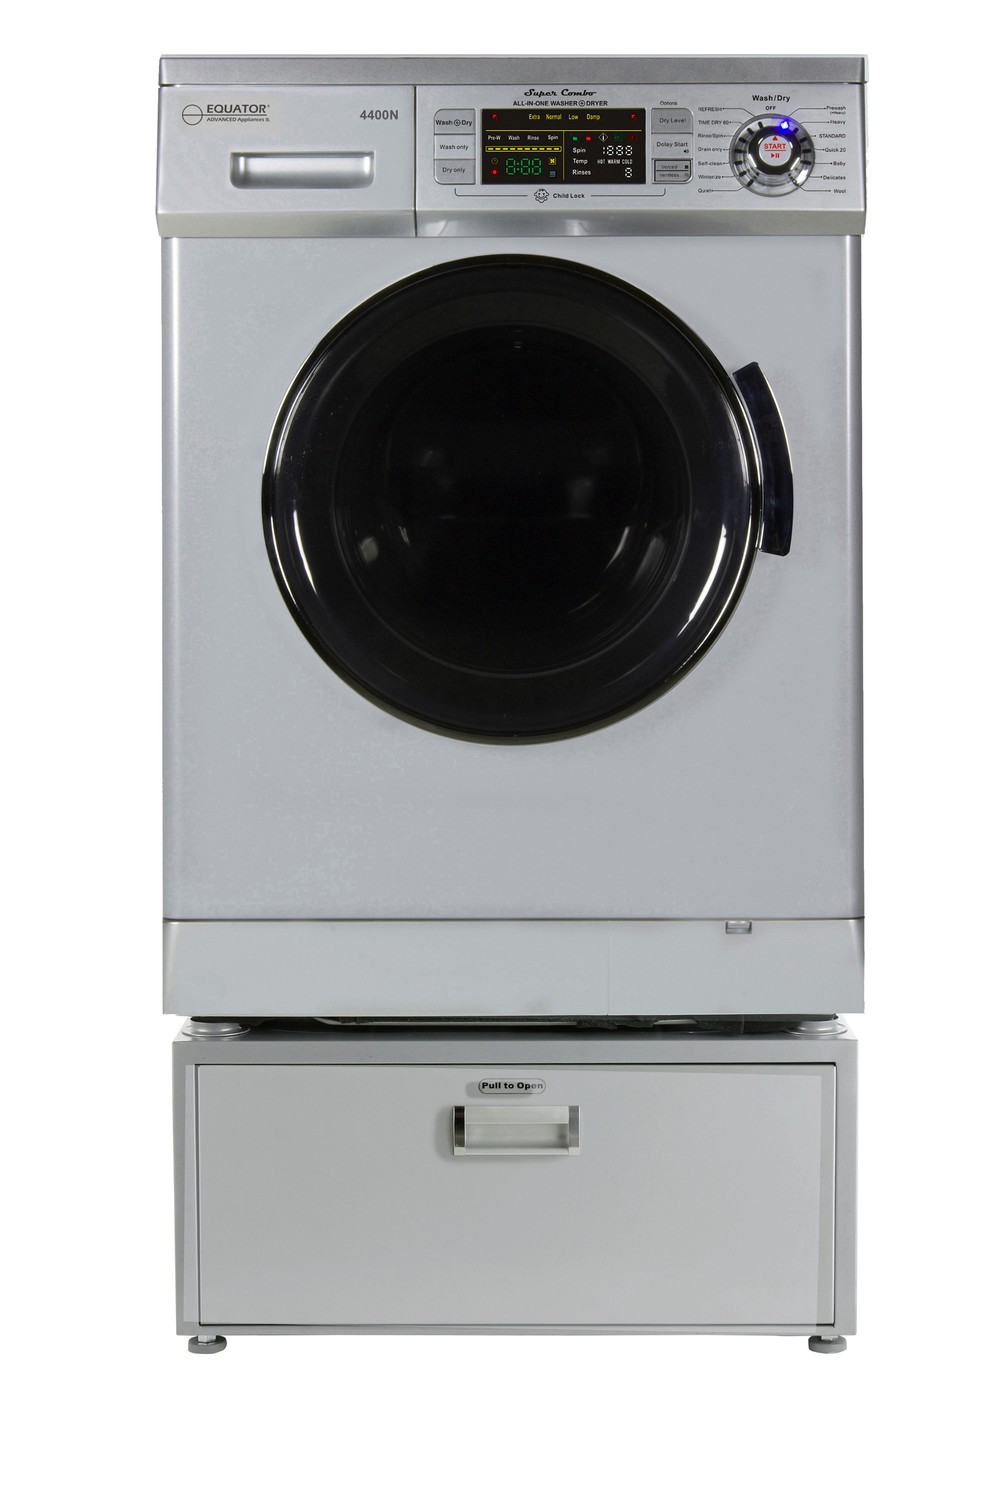 Equator EZ 4400 N Silver All-in-one New Compact Combo Washer Dryer with Pedestal Storage Drawer